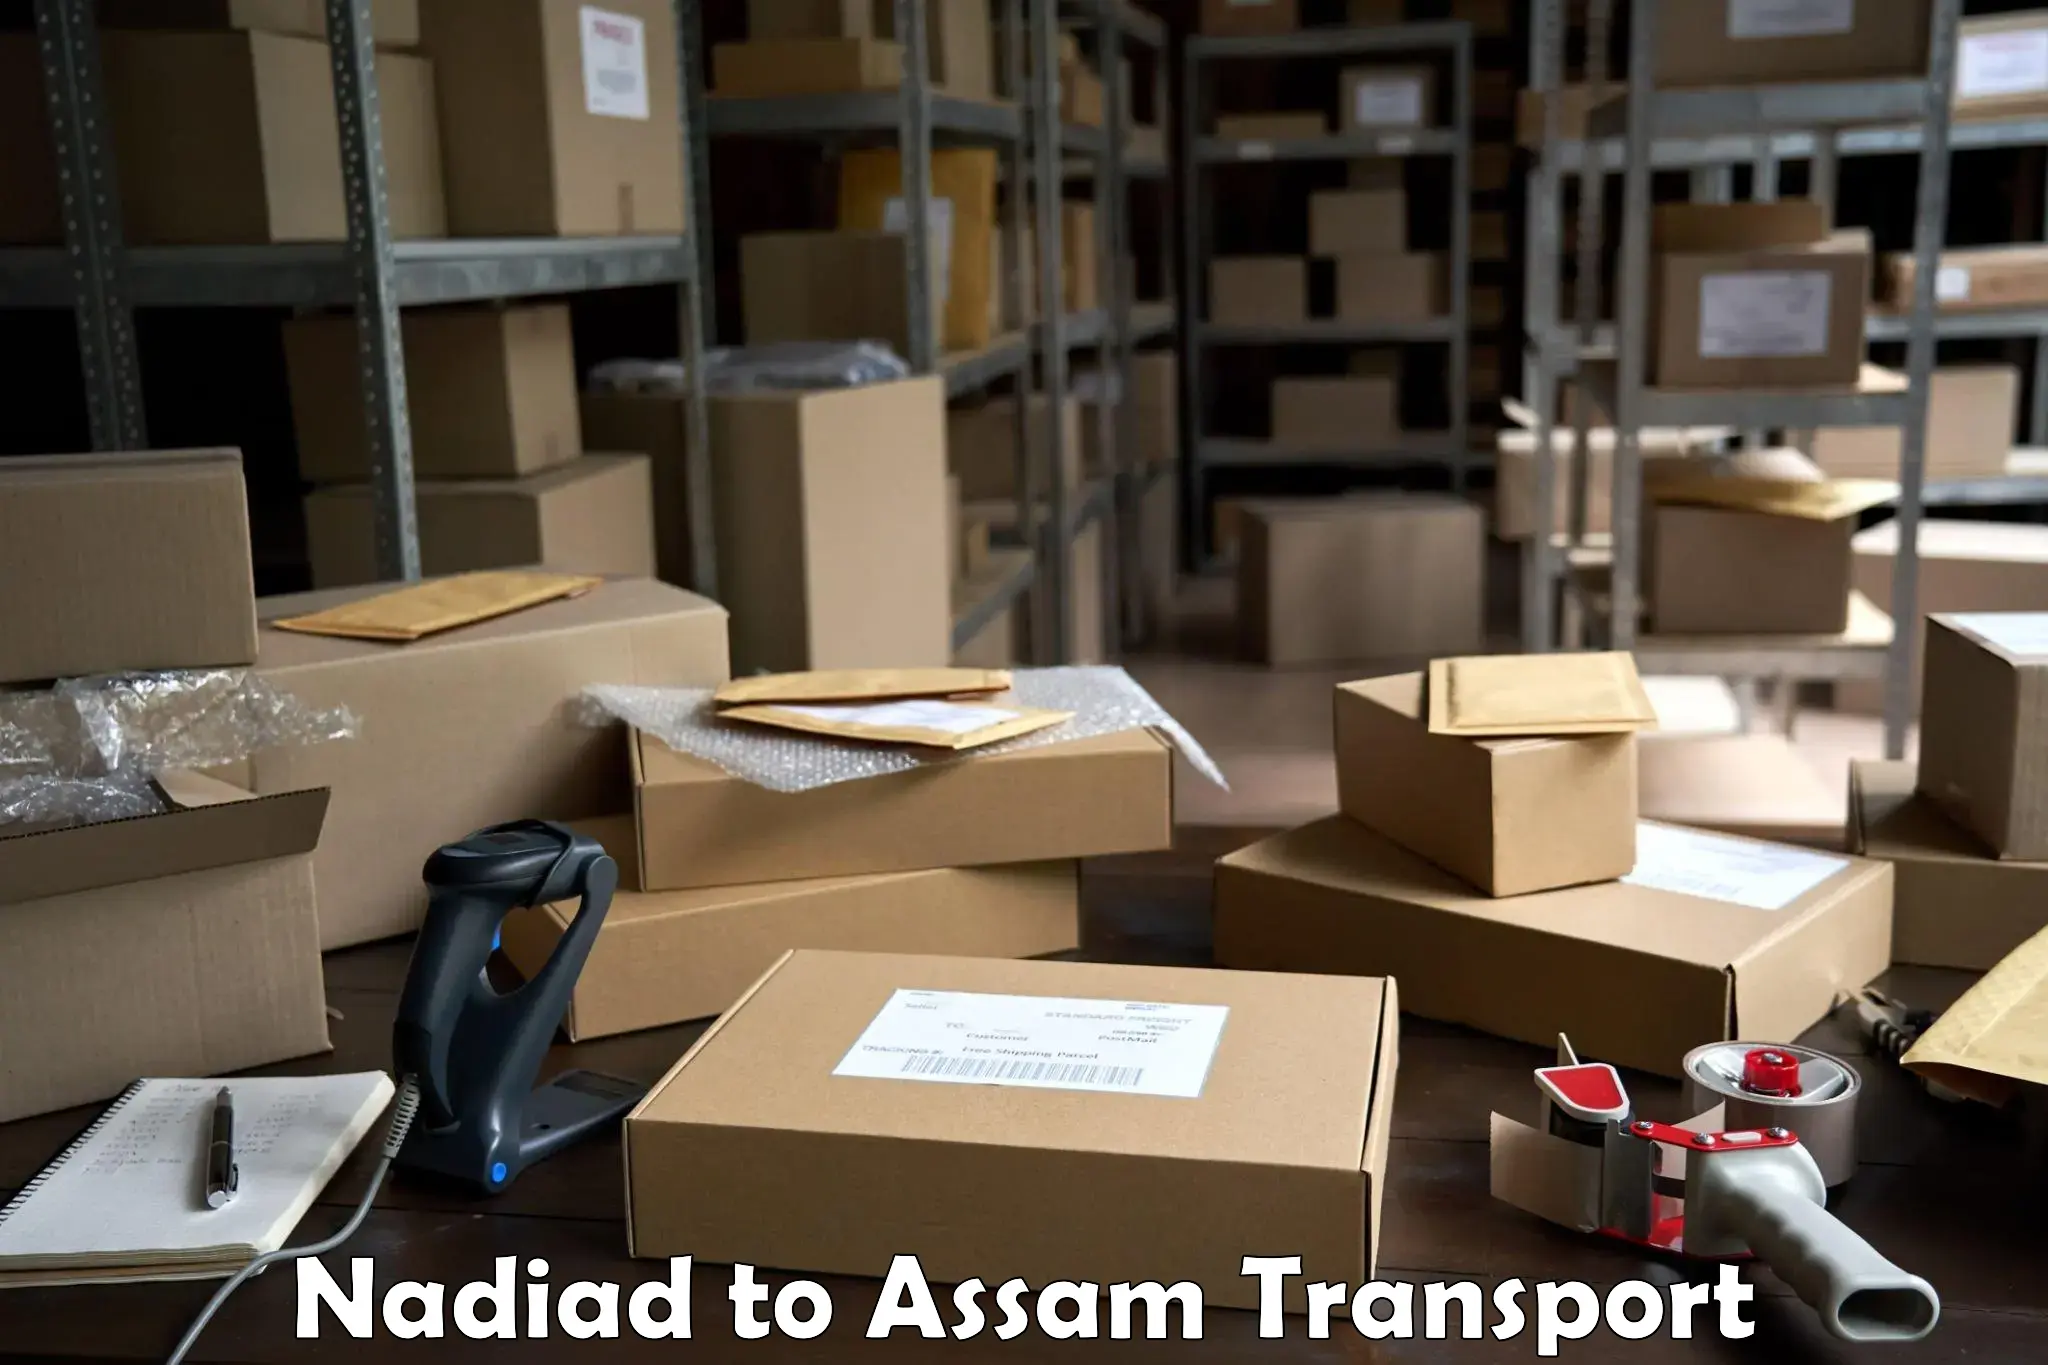 Cycle transportation service Nadiad to Assam